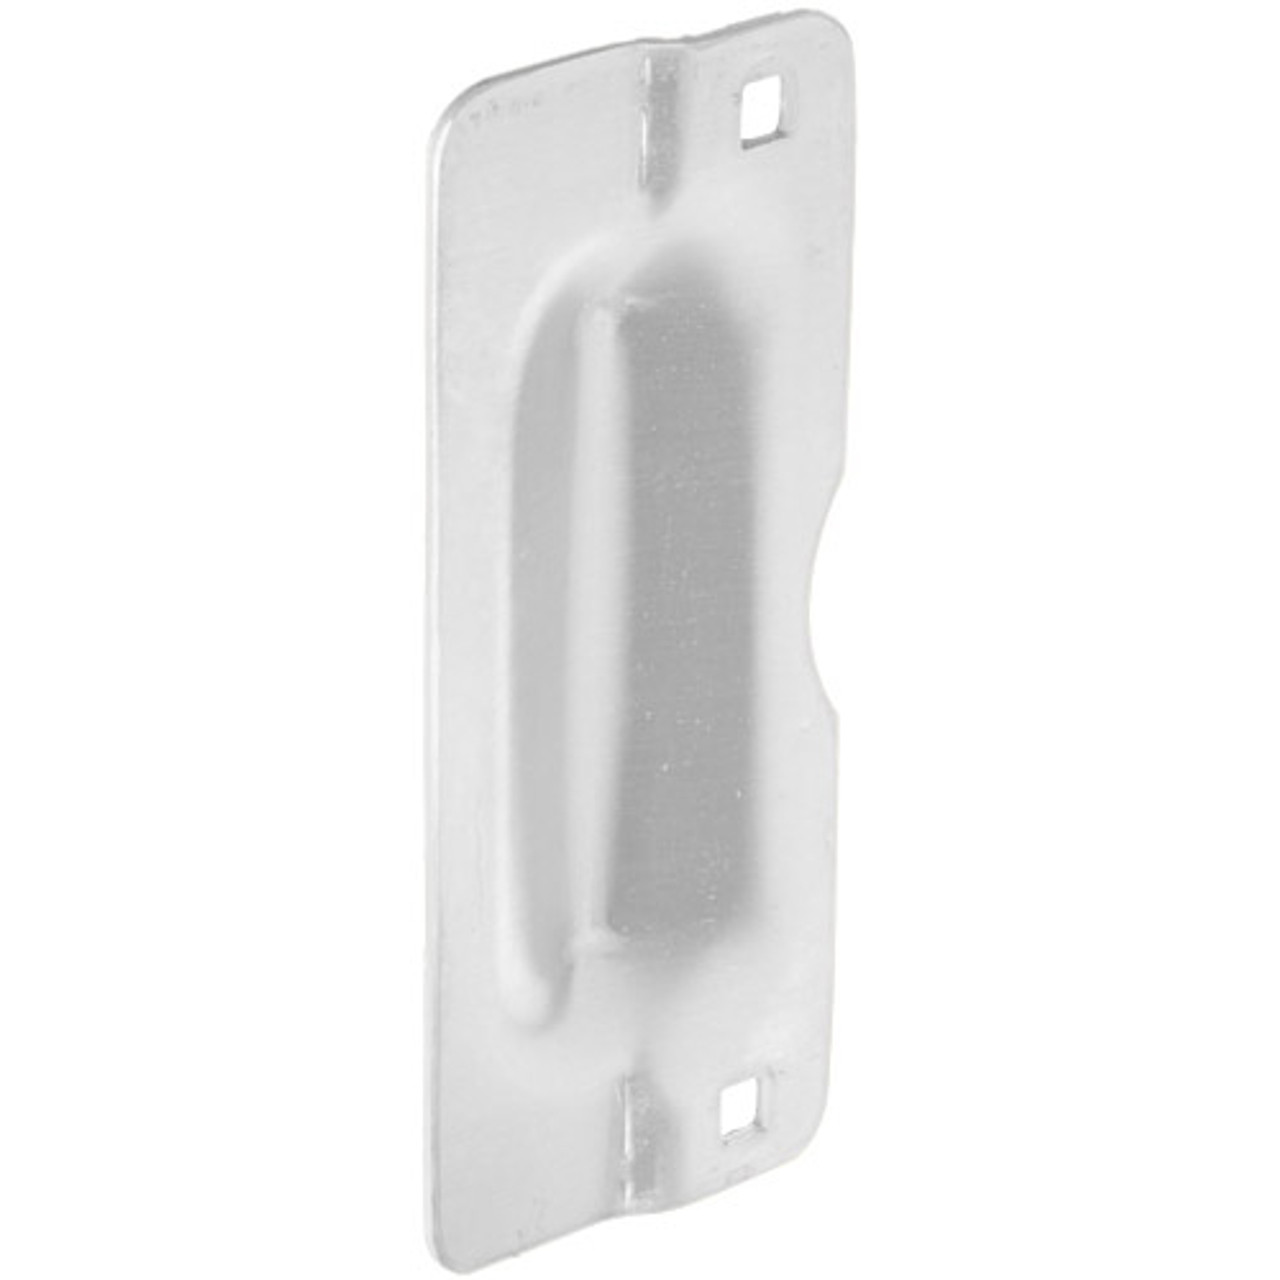 LP-207-CP Don Jo Latch Protector in Chrome Plated Finish